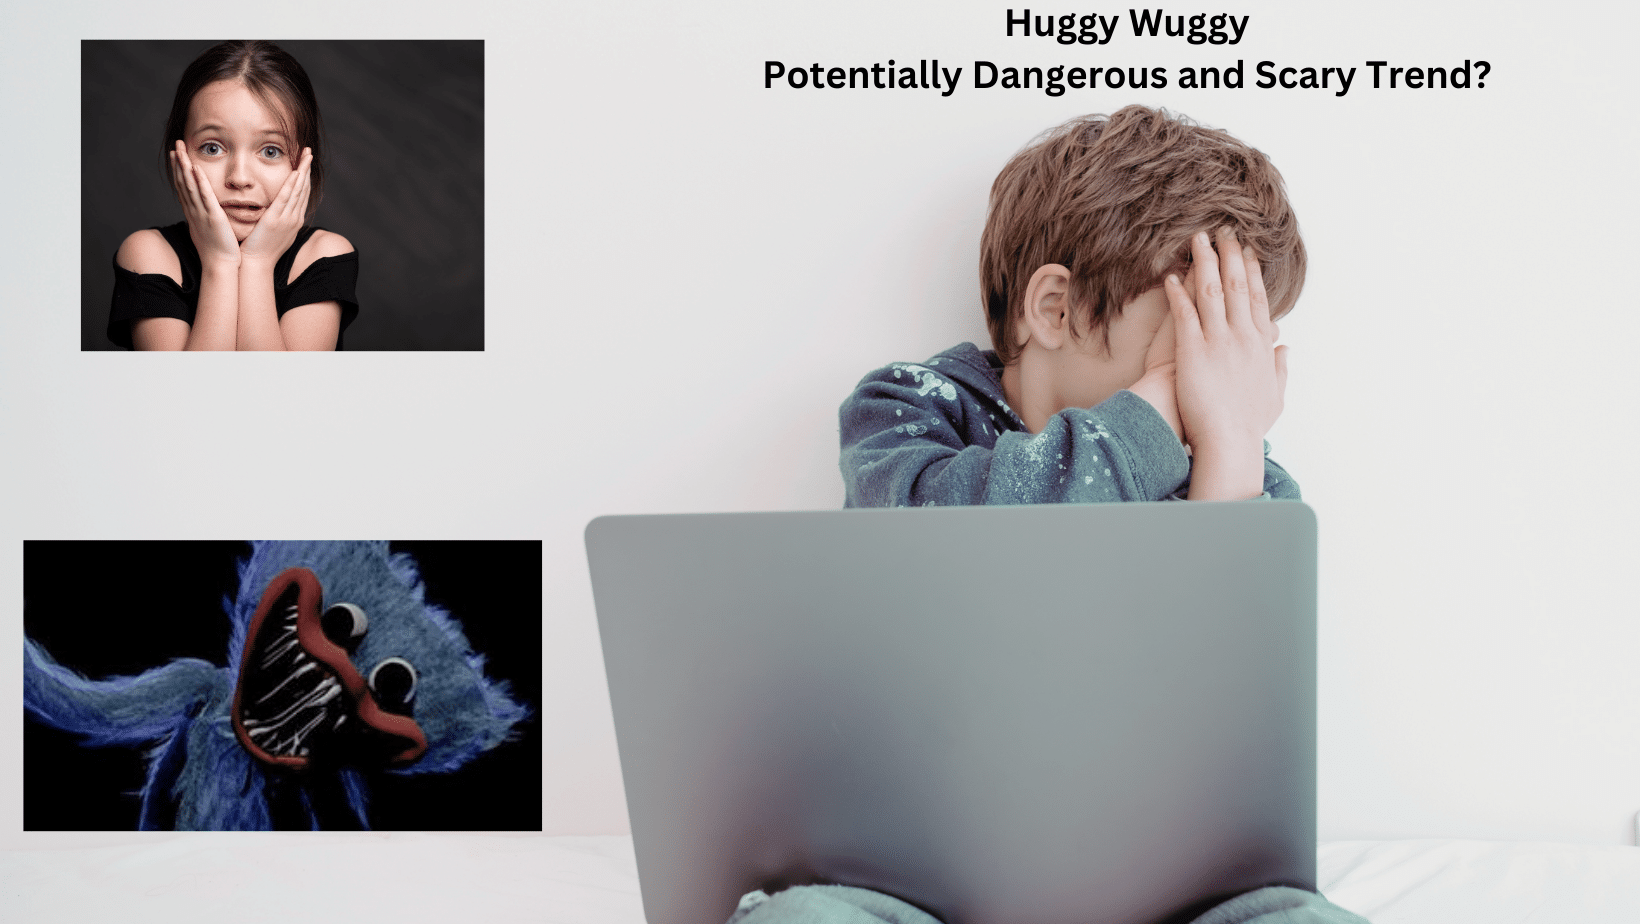 The disturbing Huggy Wuggy trend impacting young children